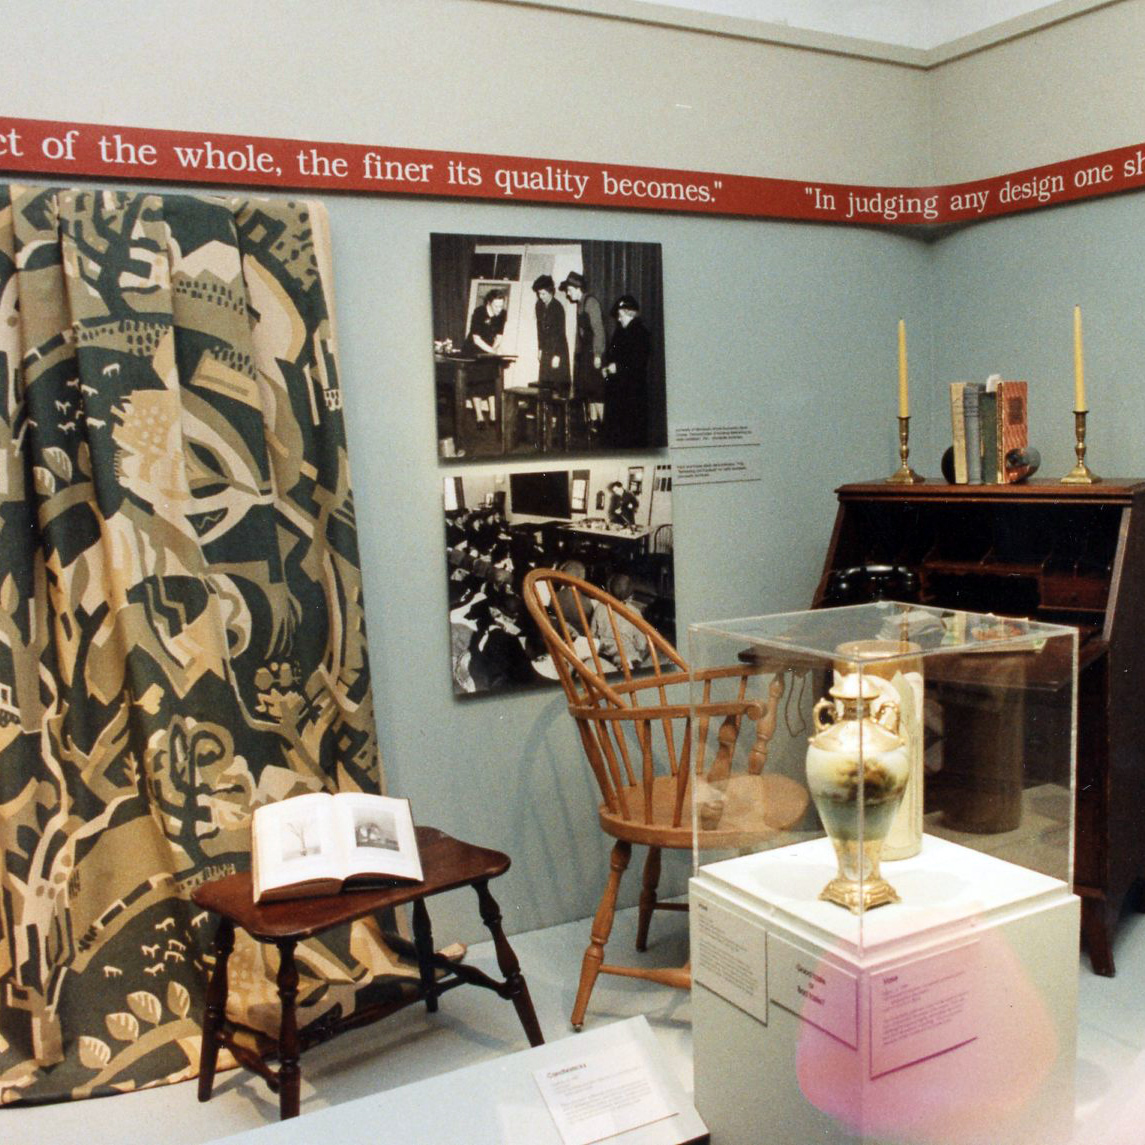 Art in Everyday Life: The Goldstein Legacy objects on display